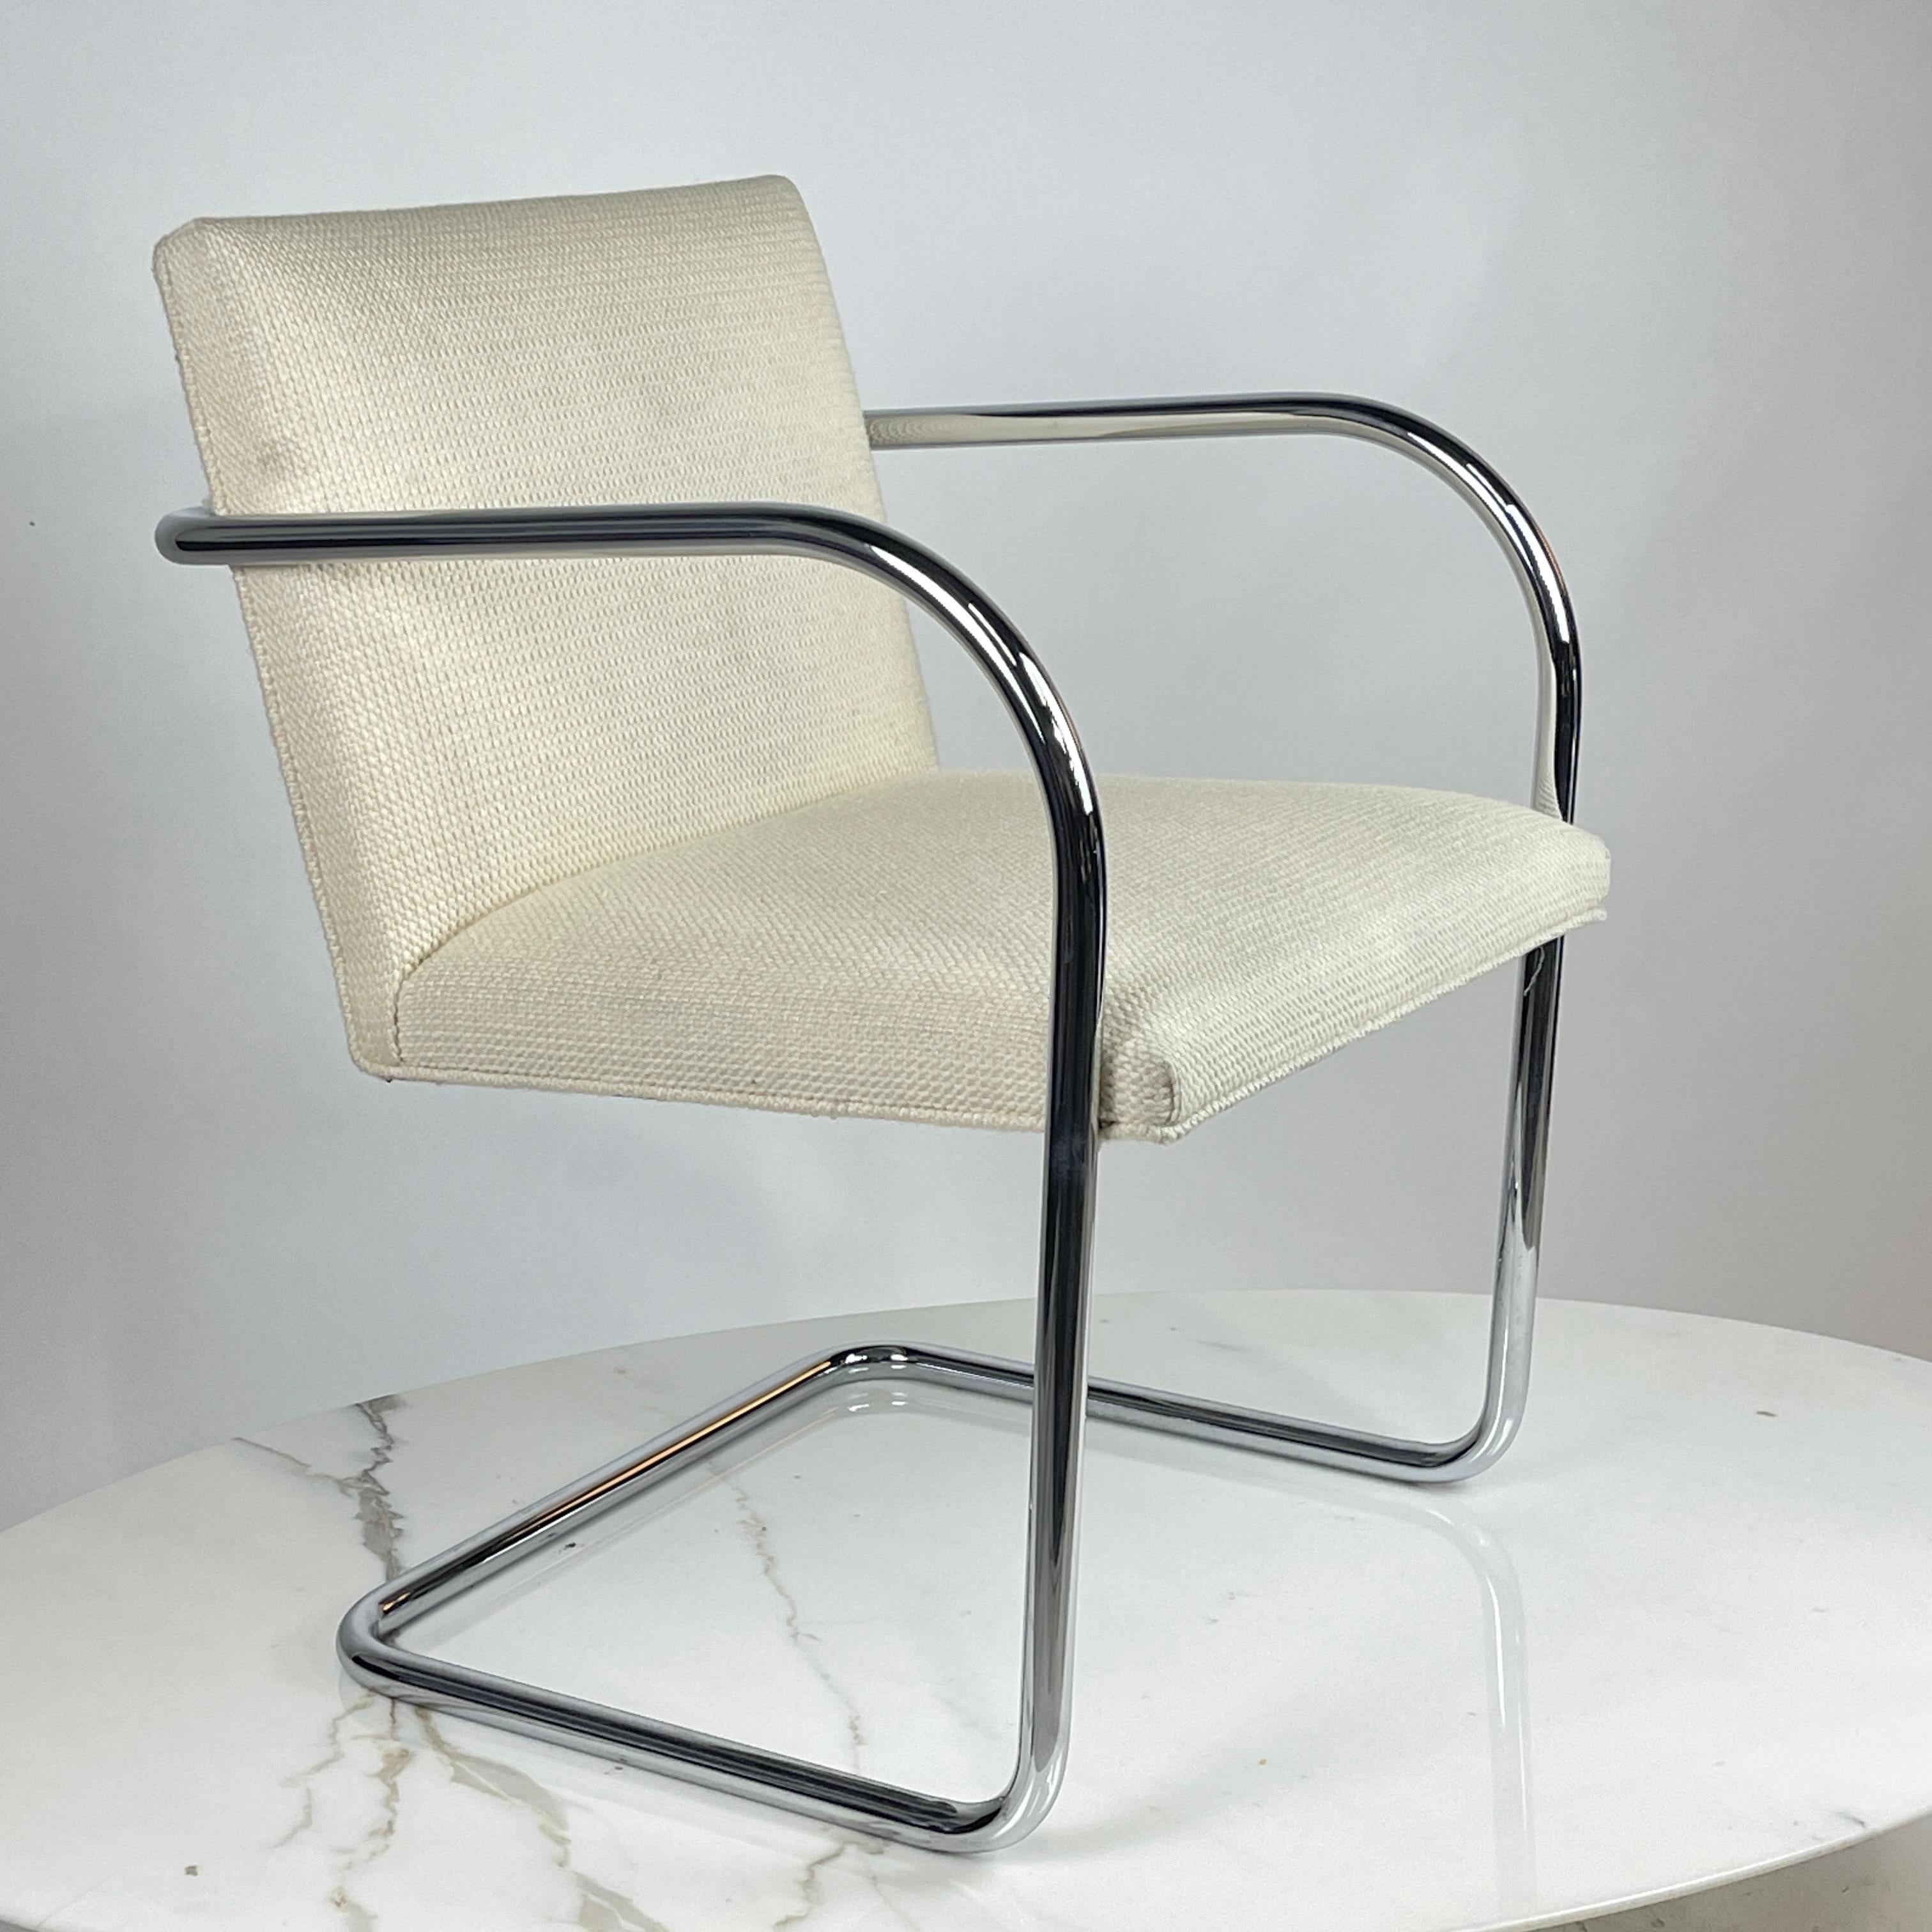 Set of 4 Mies Van Der Rohe for Knoll Brno Chairs in Cato Upholstery 60 available For Sale 11